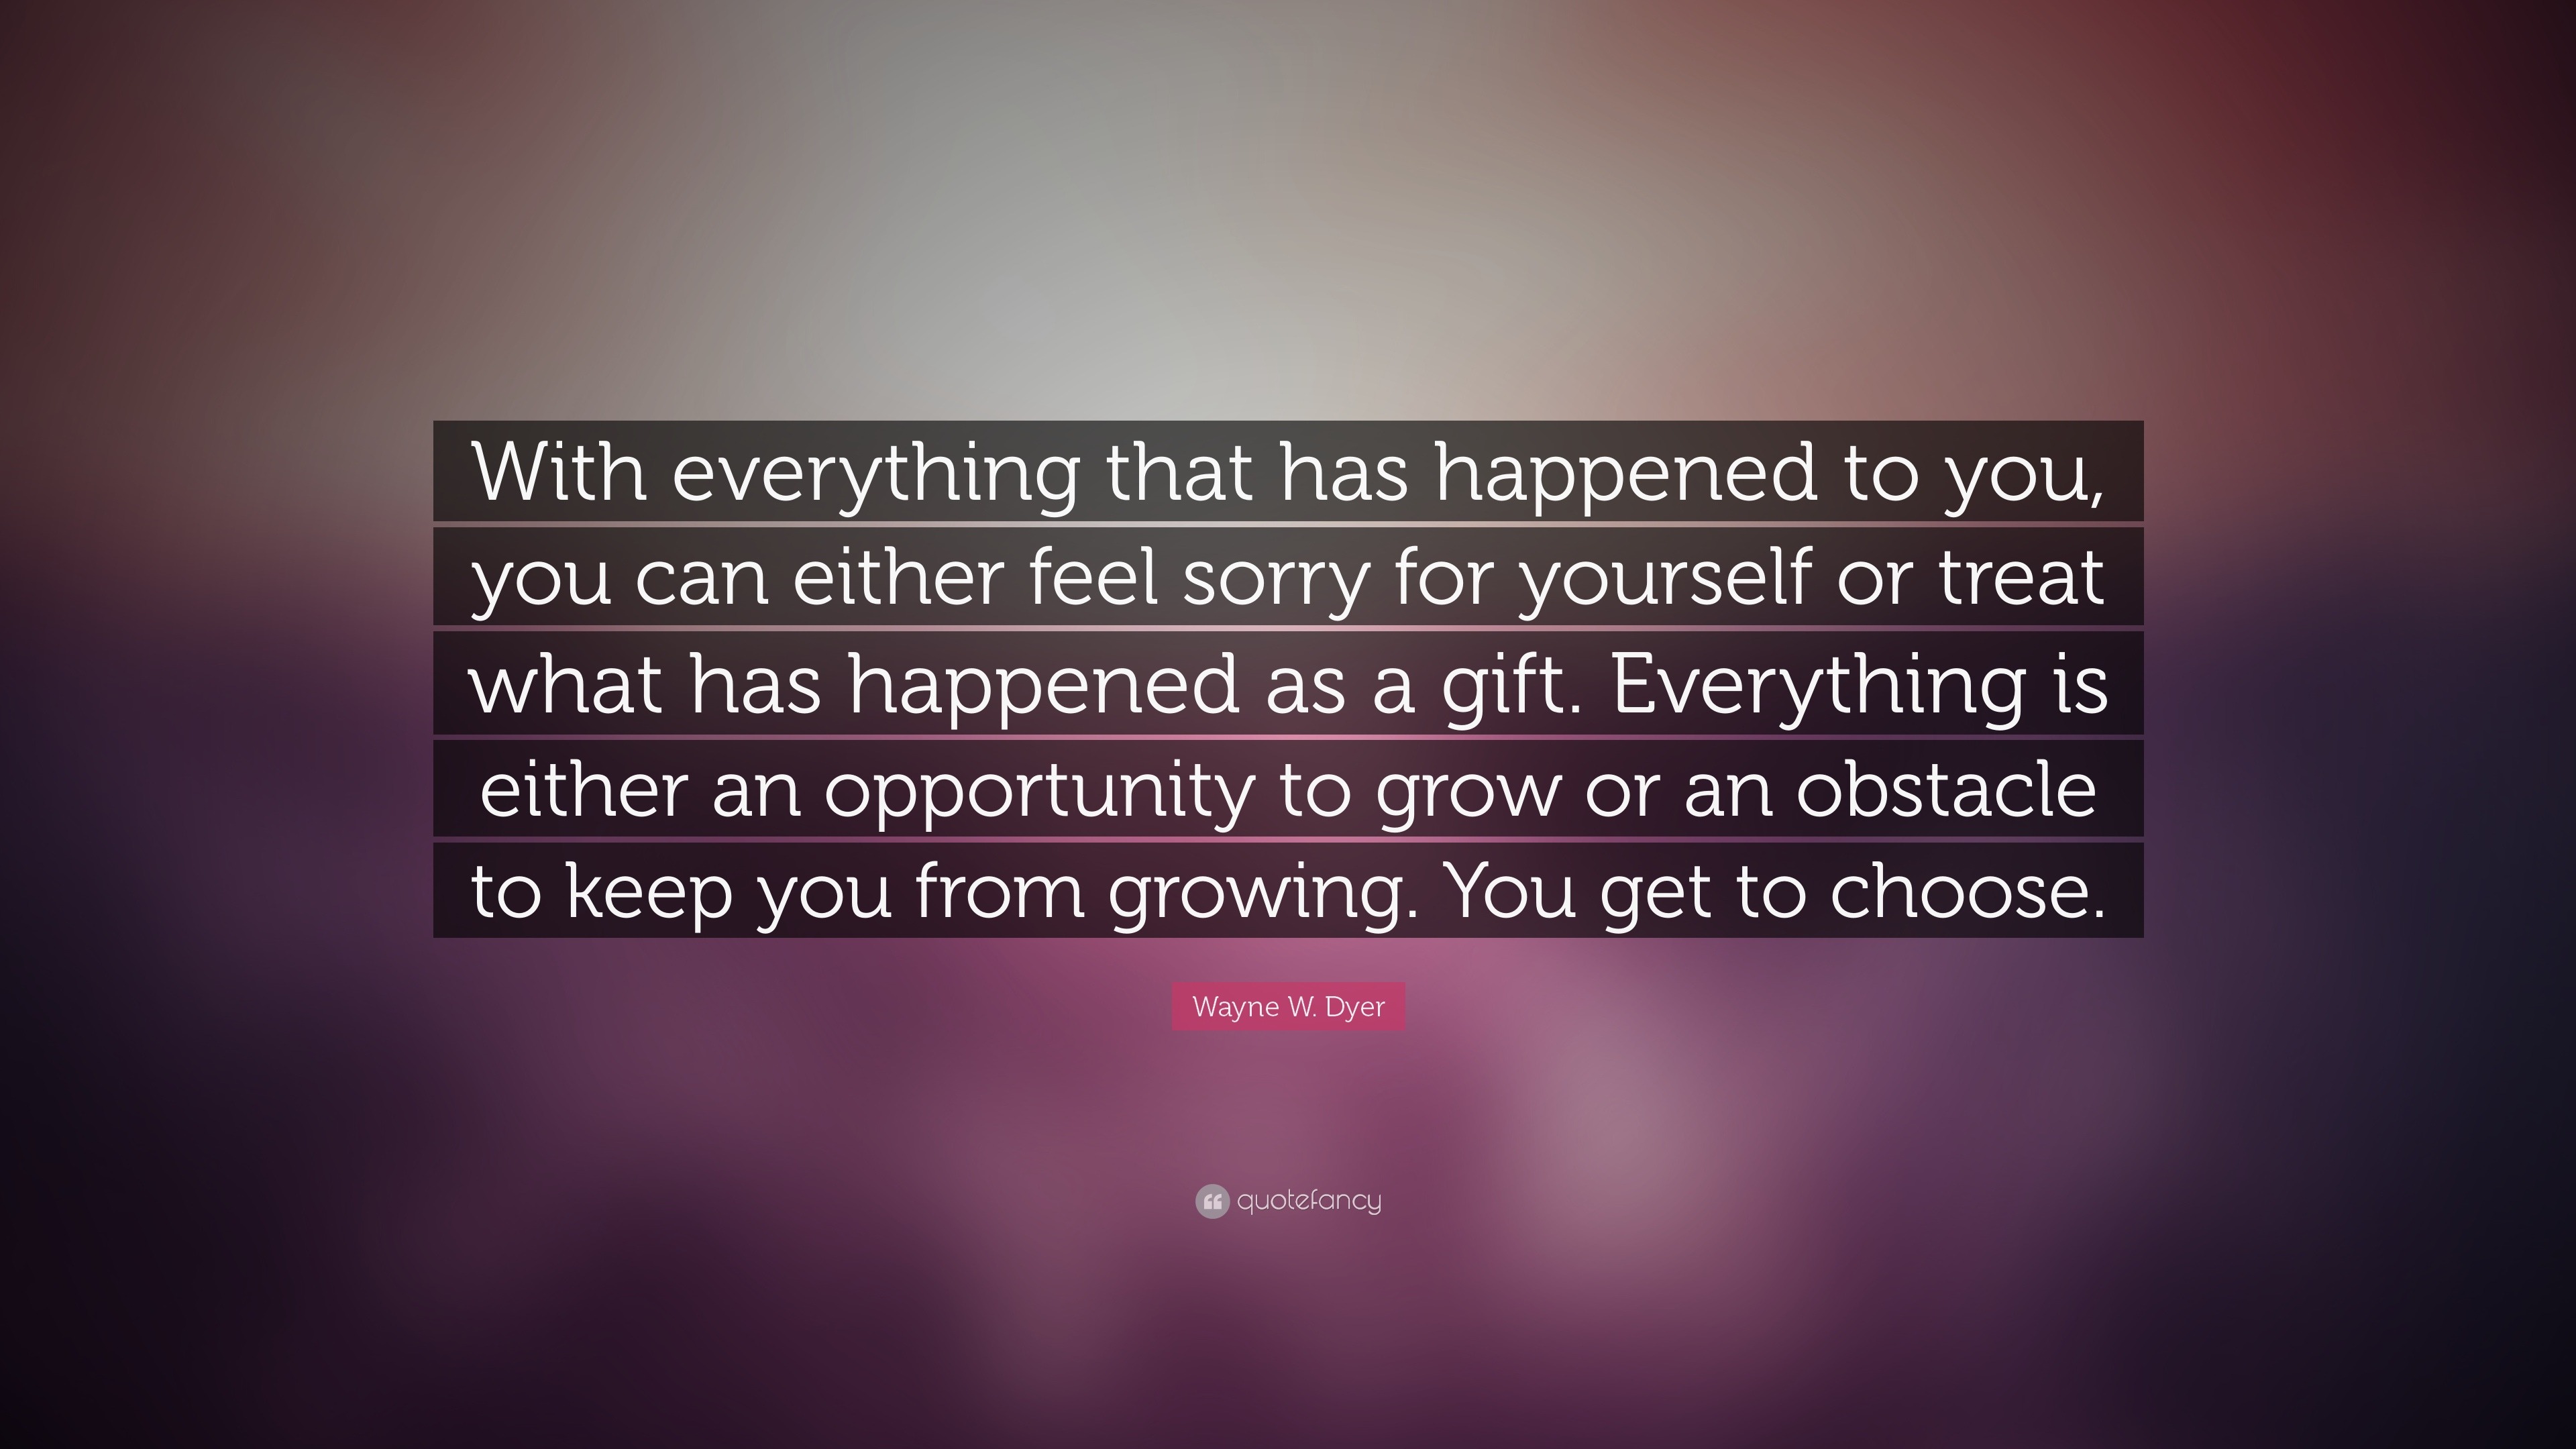 what has happened has happened quotes